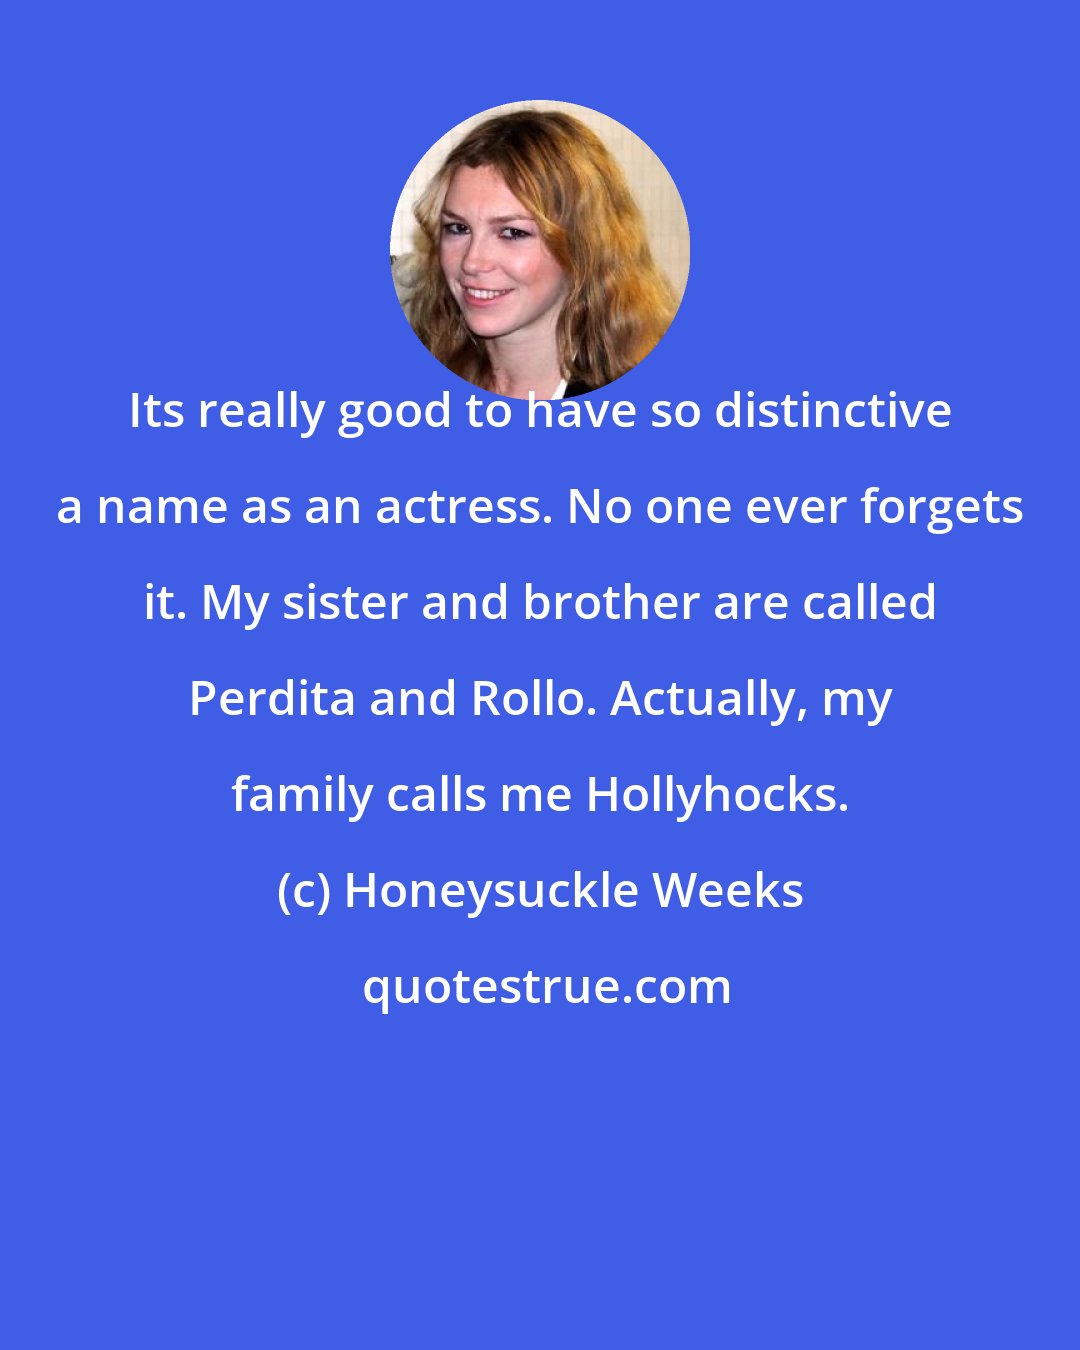 Honeysuckle Weeks: Its really good to have so distinctive a name as an actress. No one ever forgets it. My sister and brother are called Perdita and Rollo. Actually, my family calls me Hollyhocks.